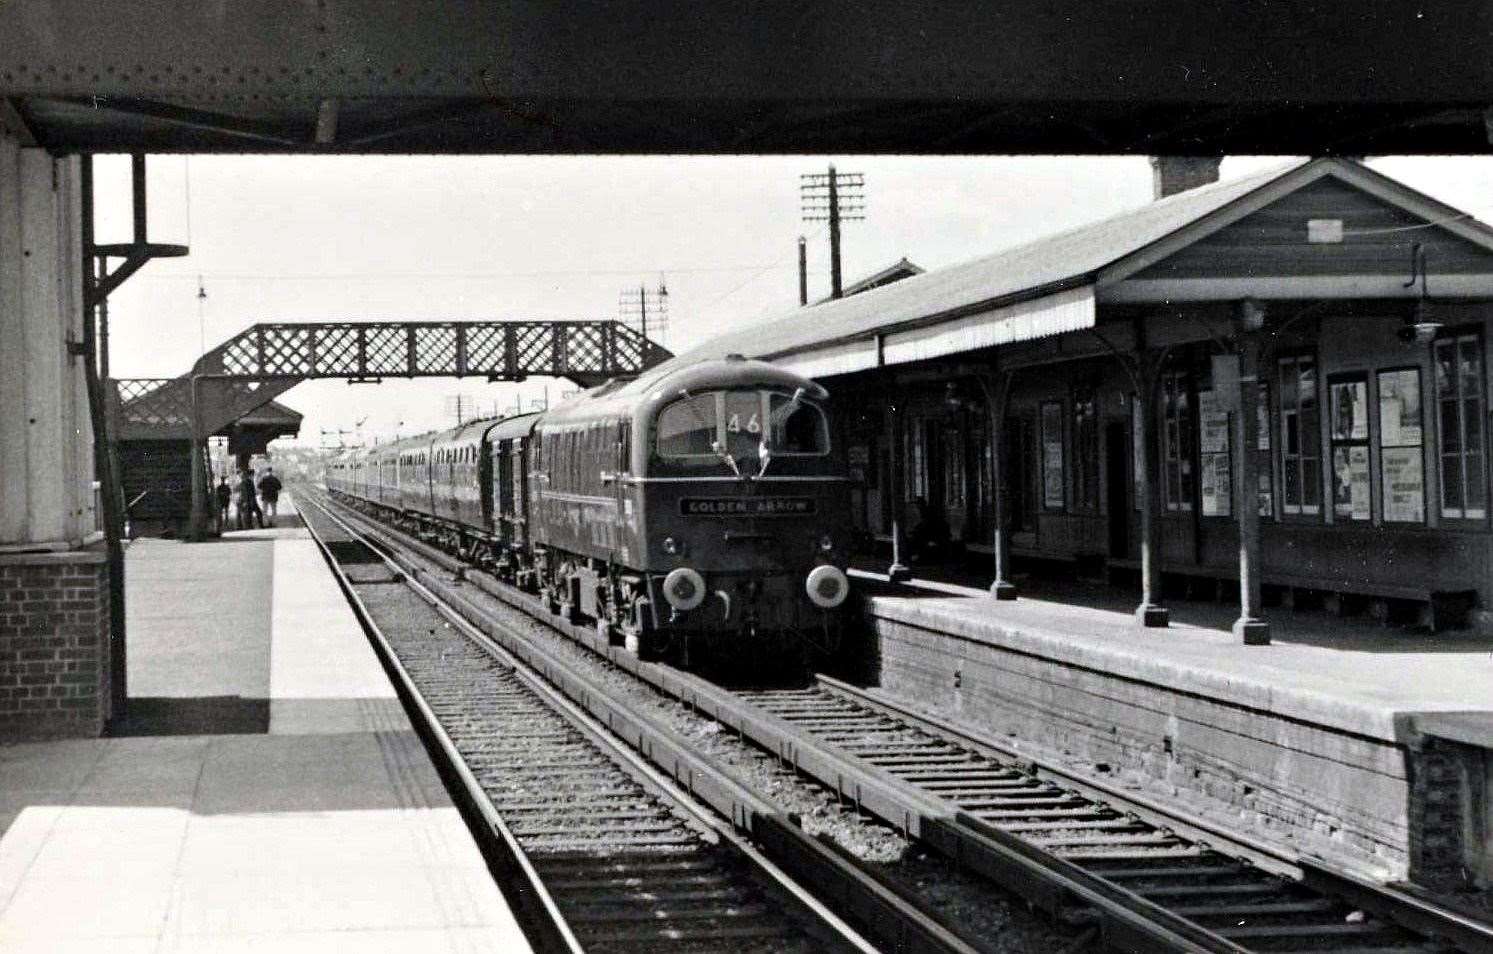 The Golden Arrow hauled by class 71 E5015 passing through Folkestone Junction station bound for Dover Marine station on August 7, 1961. Photograph and copyright ©Trevor Tupper